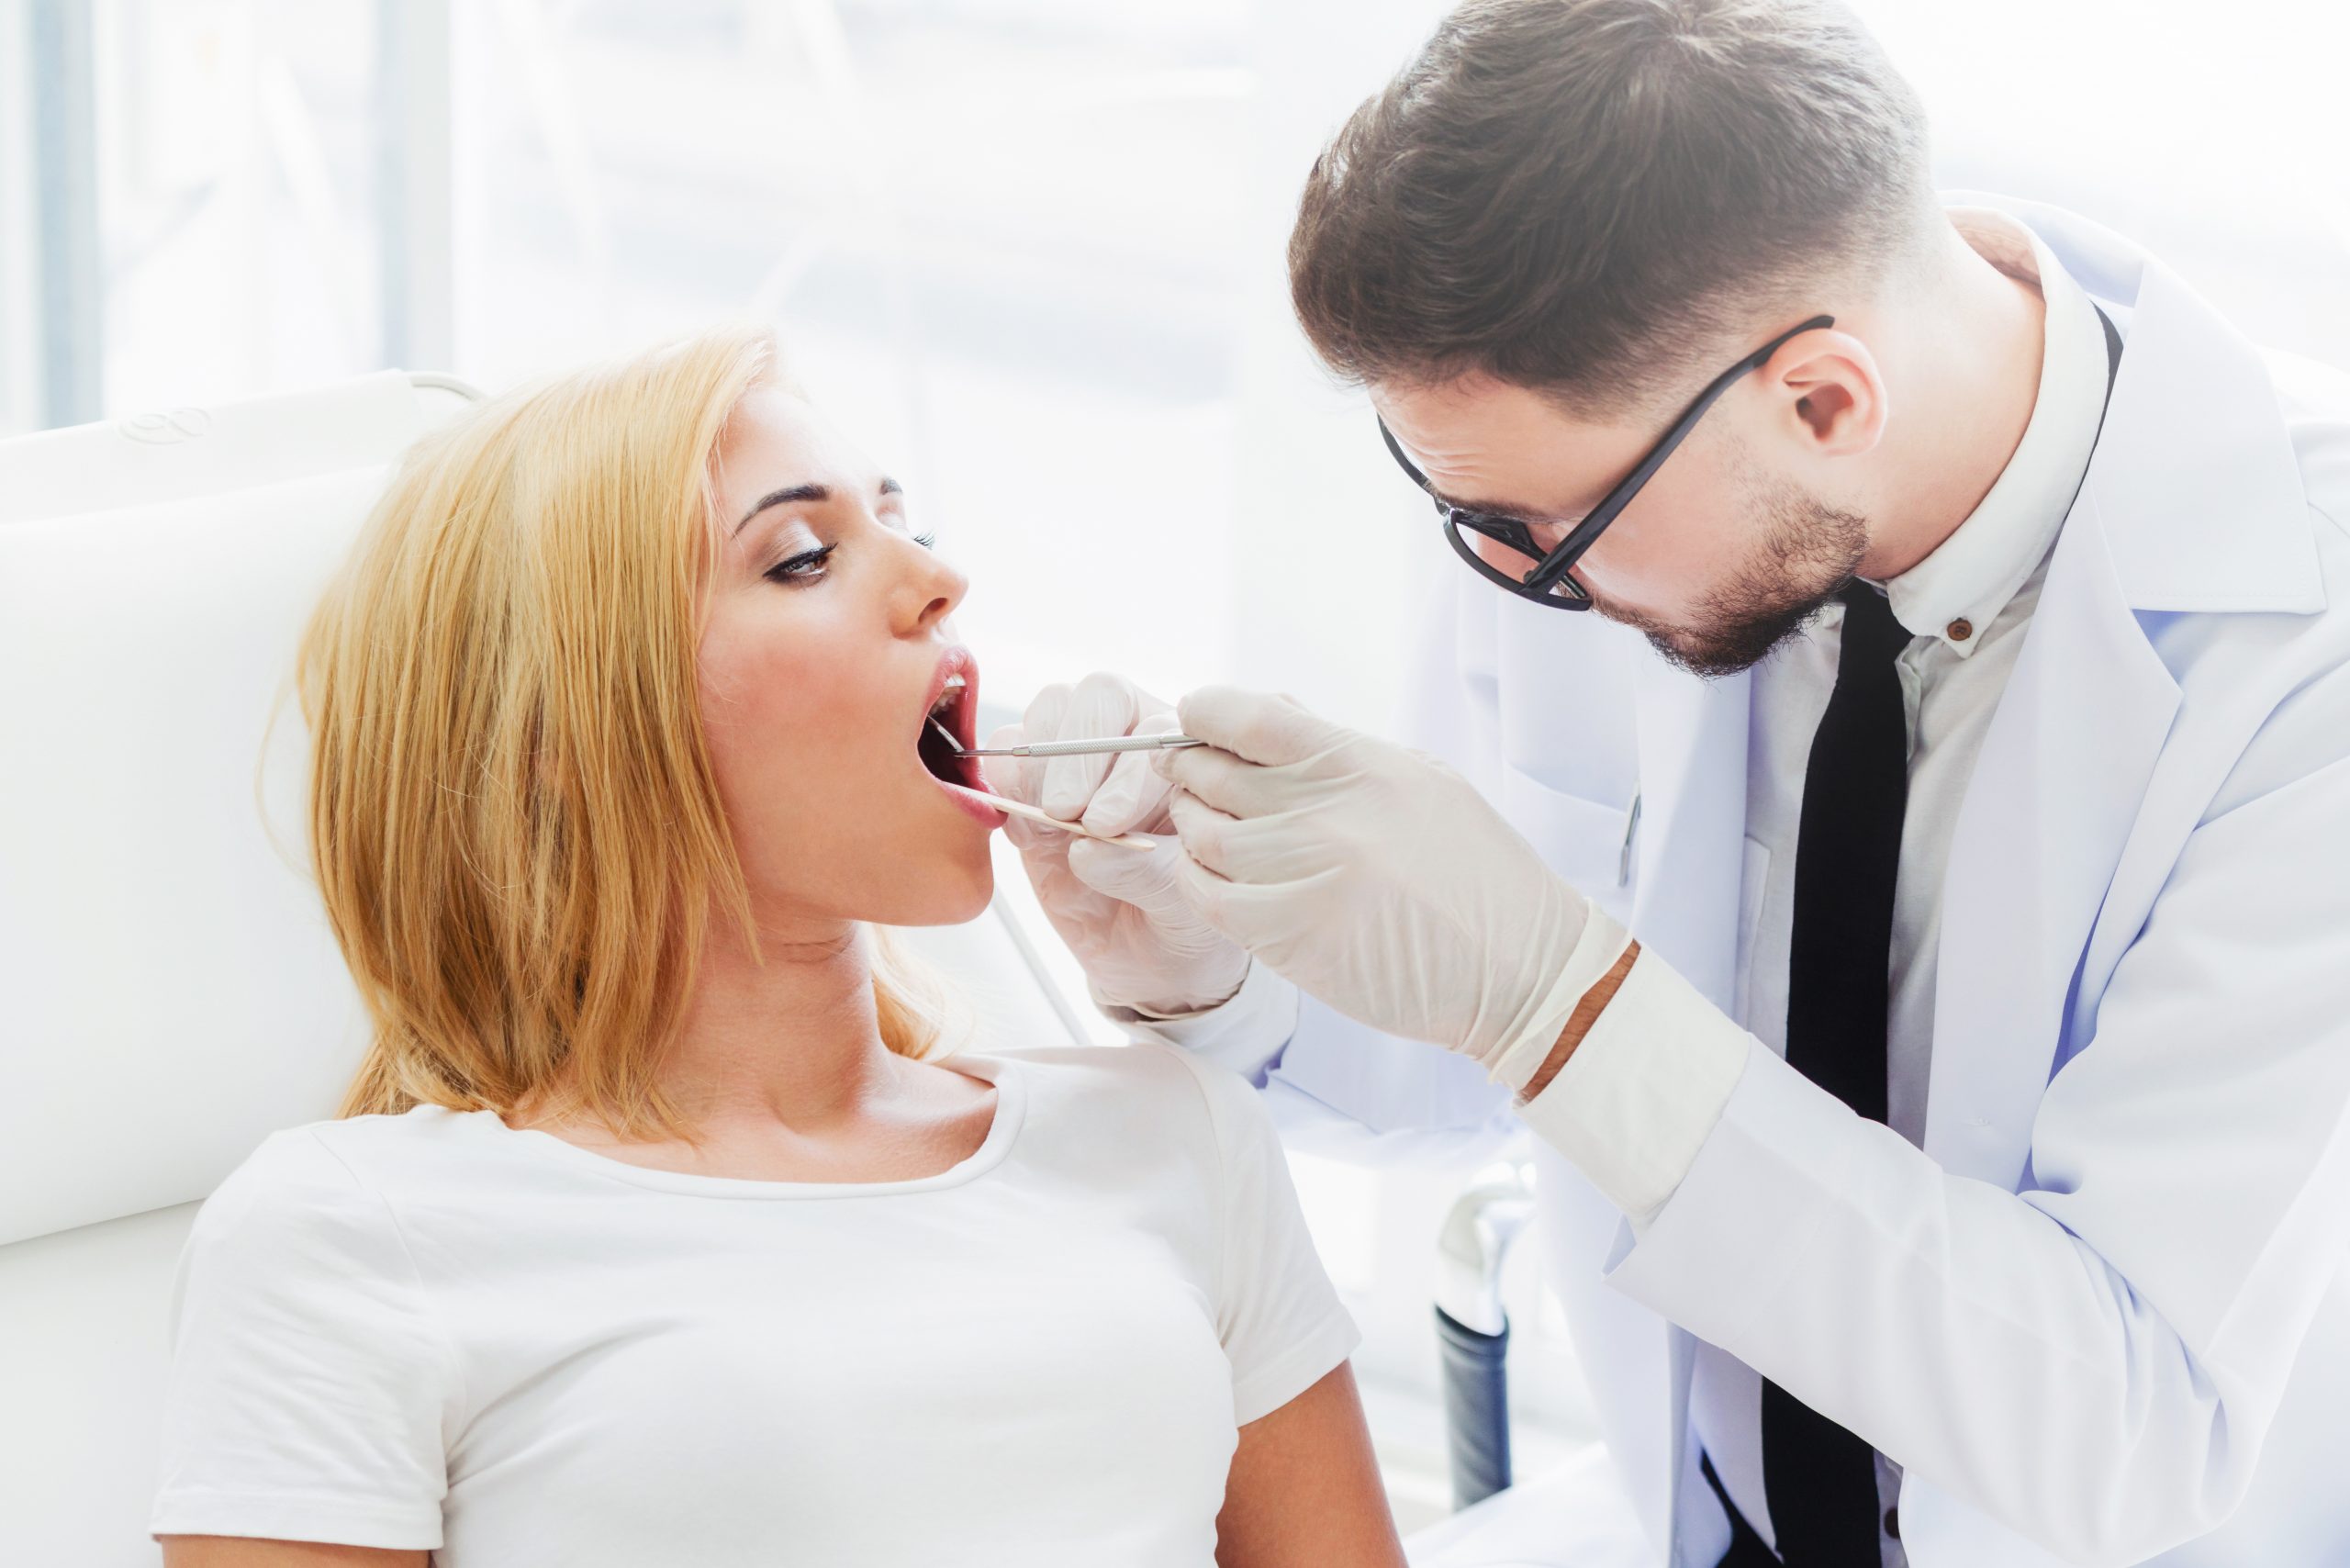 Young handsome dentist examining teeth of happy woman patient sitting on dentist chair in dental clinic. Dentistry care concept.